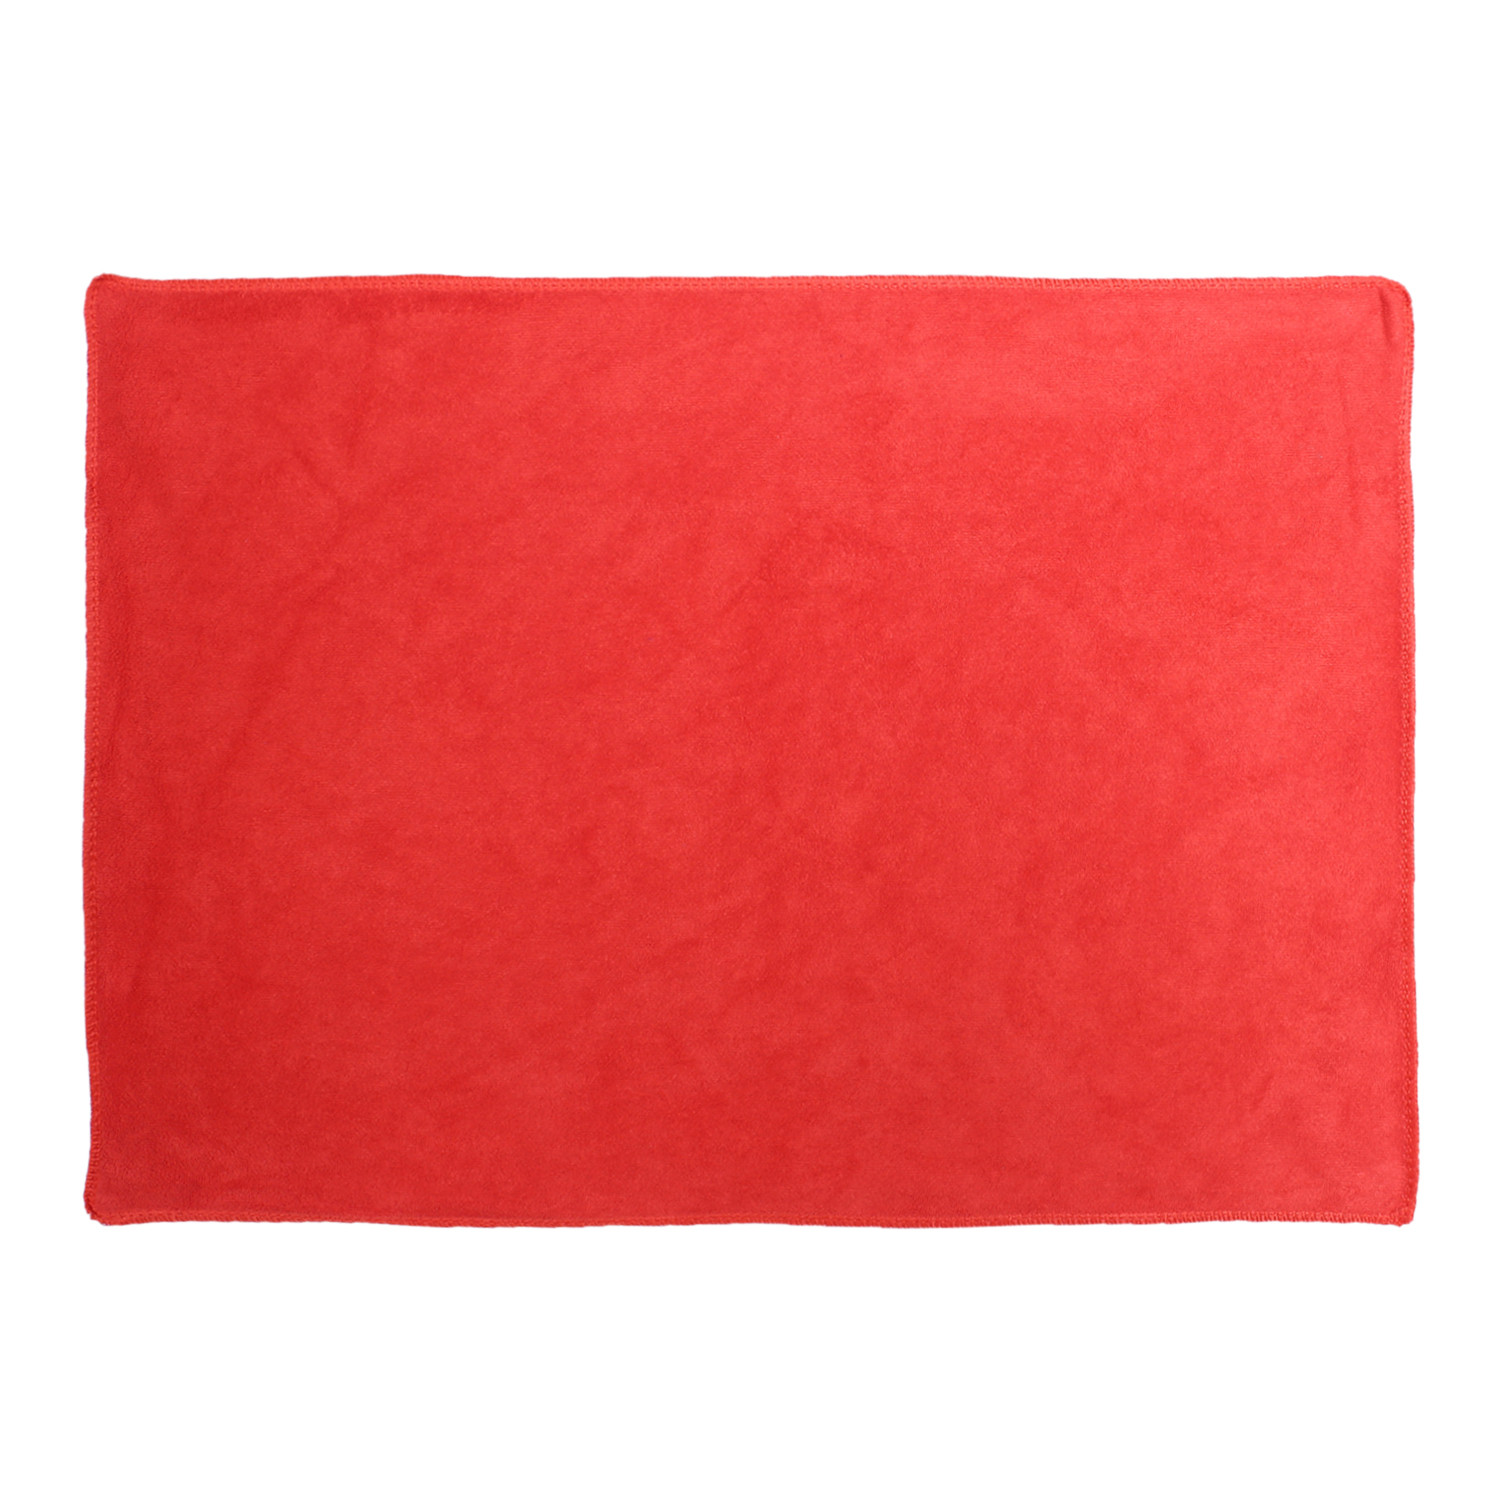 Kuber Industries Cleaning Cloths|Microfiber Highly Absorbent Wash Towels for Kitchen,Car,Window,24 x 16 Inch (Red)